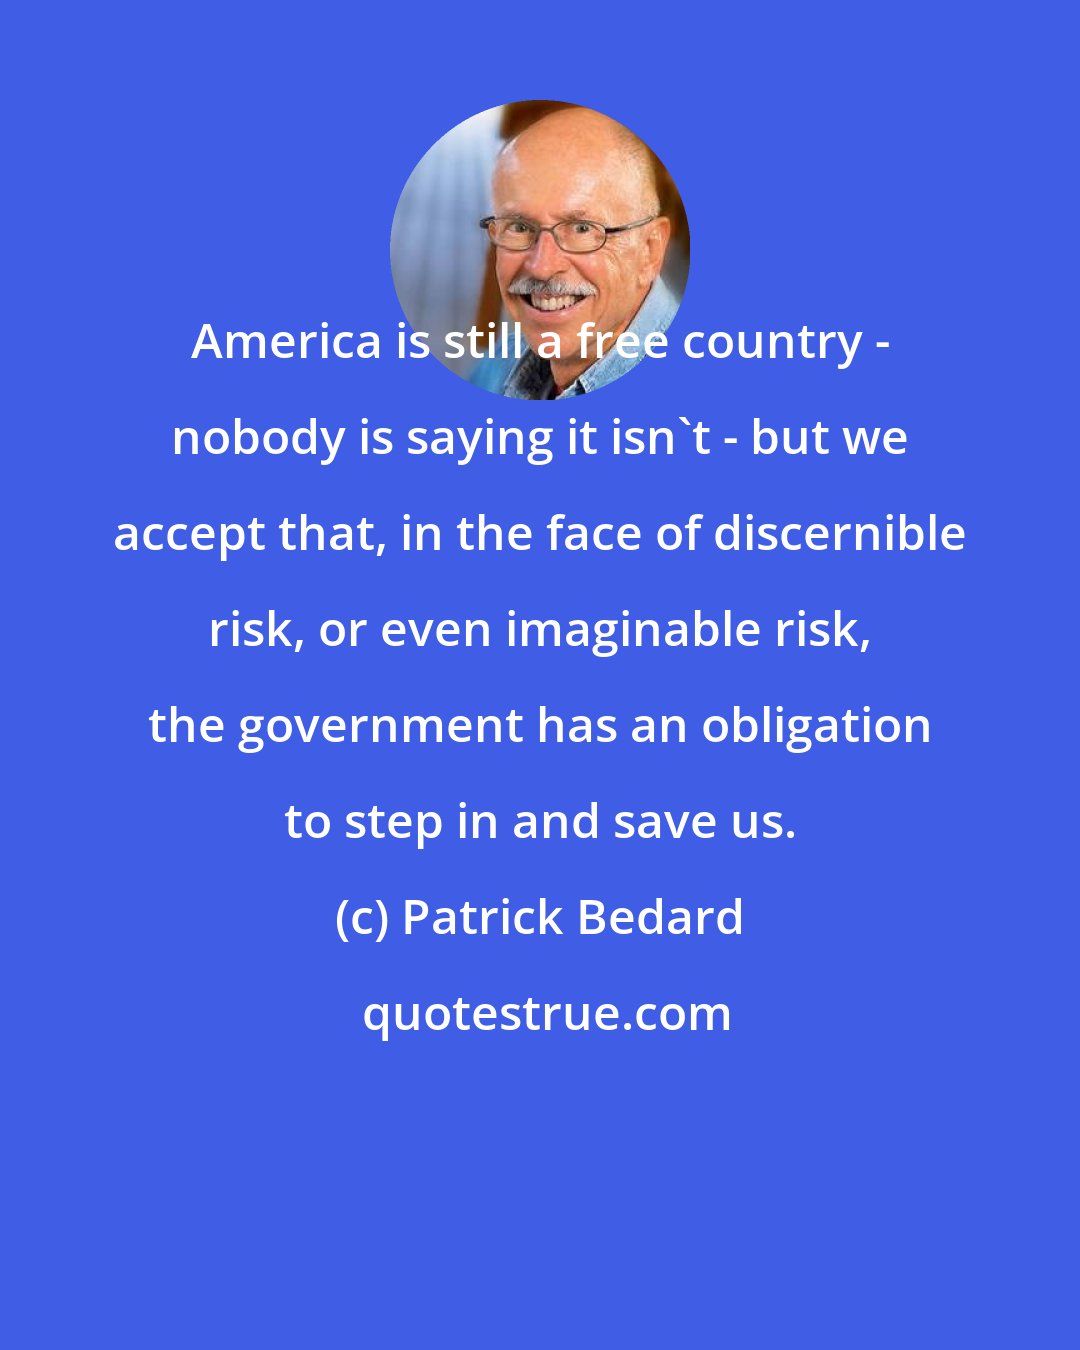 Patrick Bedard: America is still a free country - nobody is saying it isn't - but we accept that, in the face of discernible risk, or even imaginable risk, the government has an obligation to step in and save us.